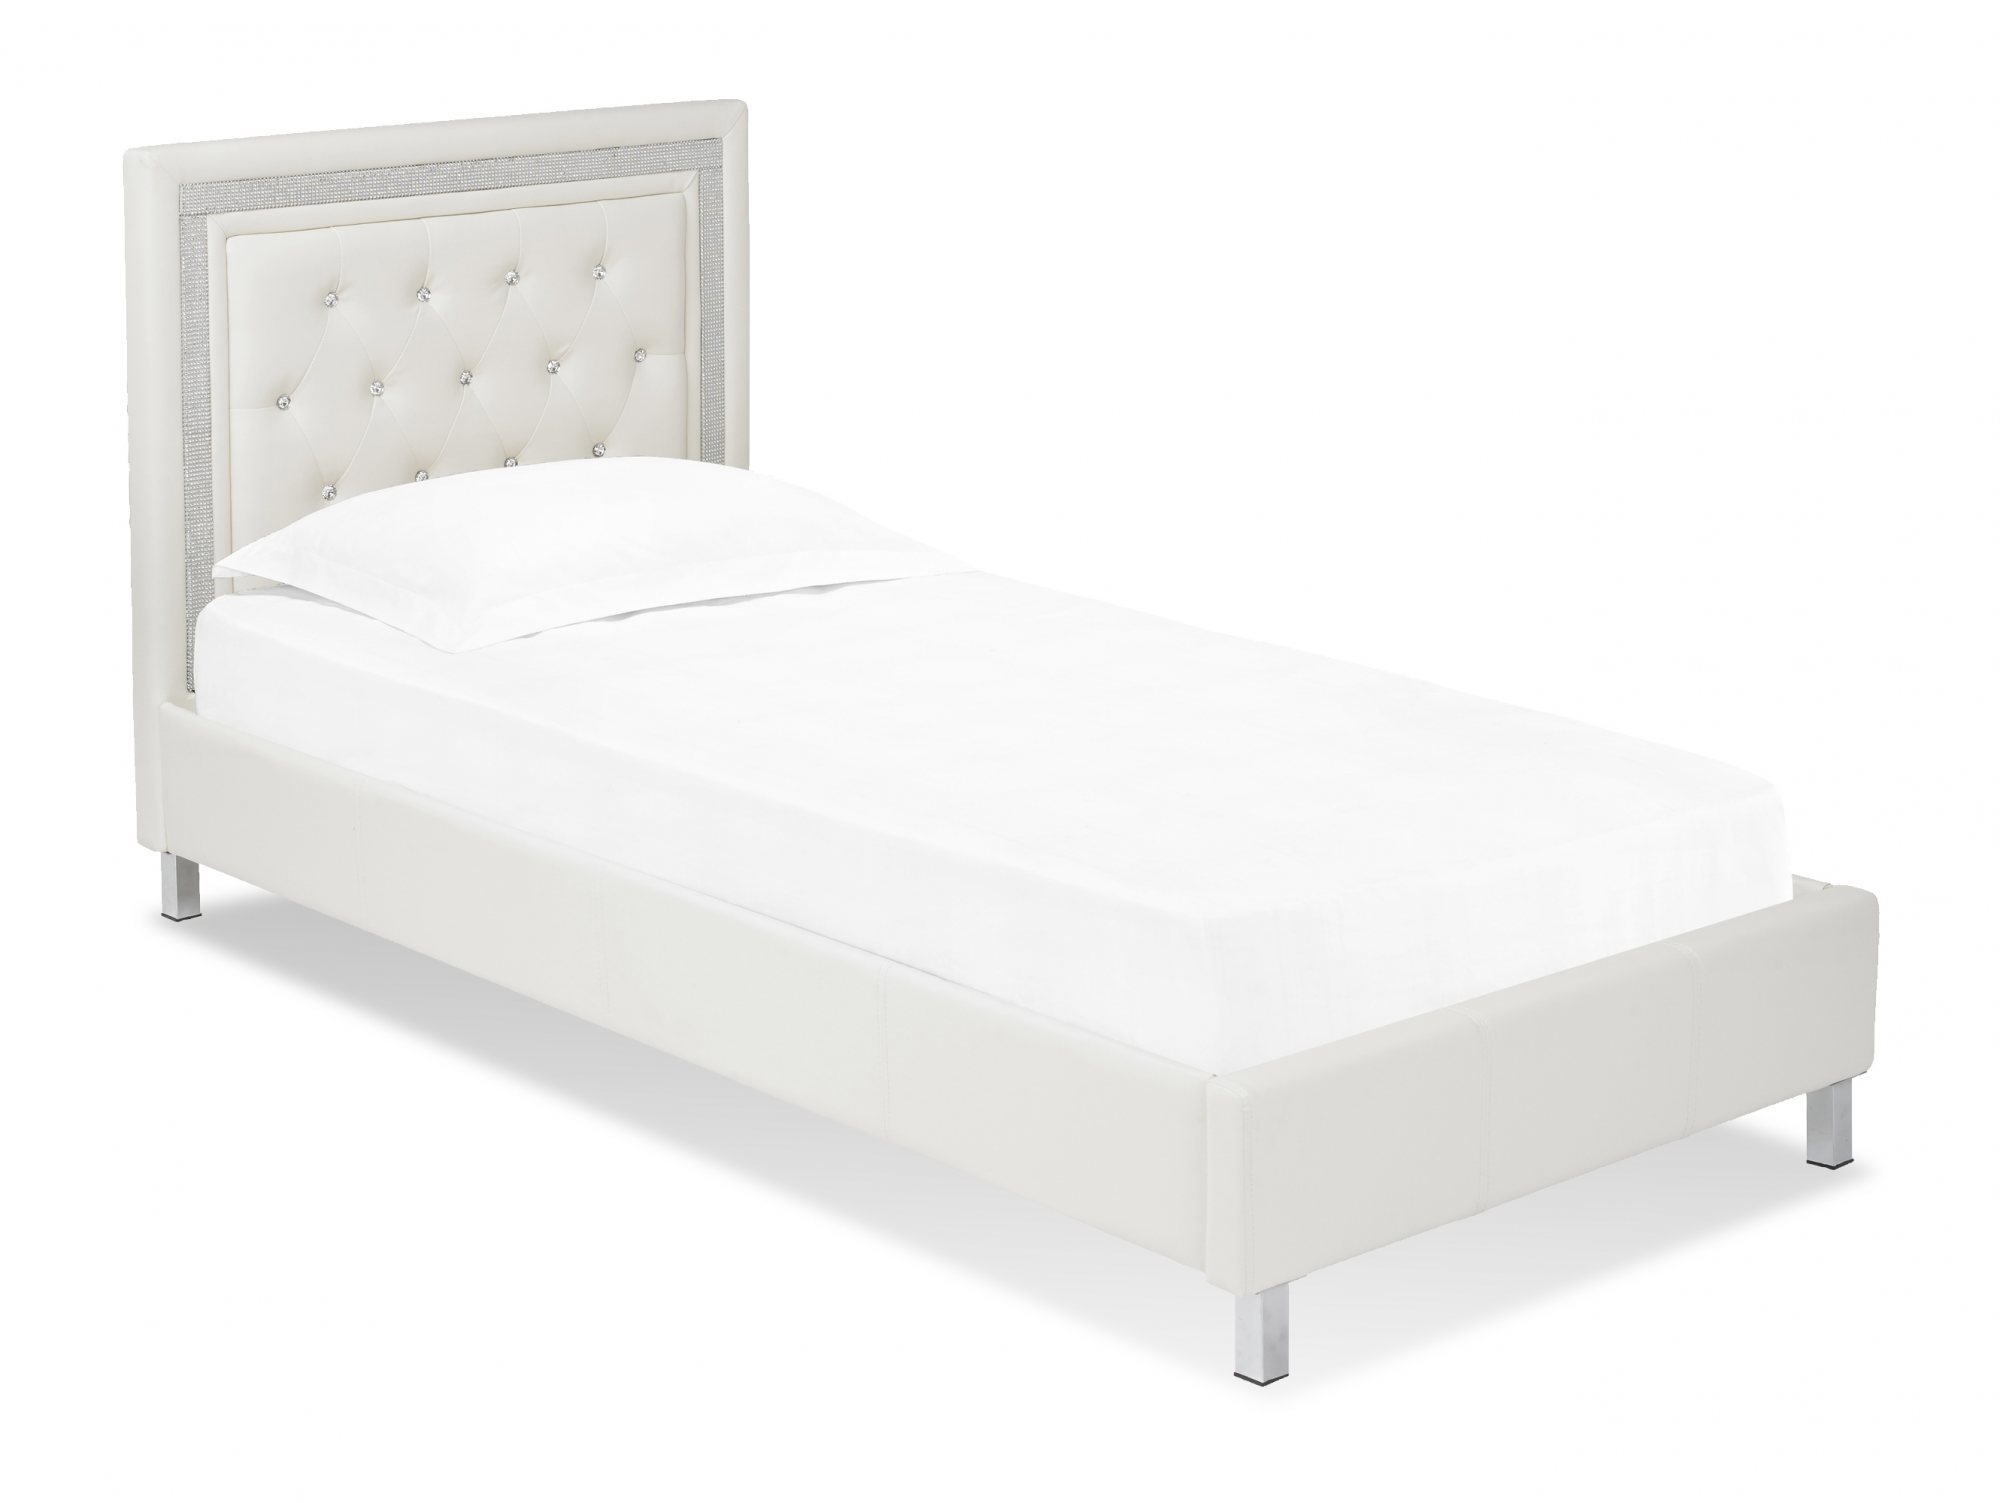 LPD LPD Crystalle 3ft Single White Upholstered Faux Leather Bed Frame